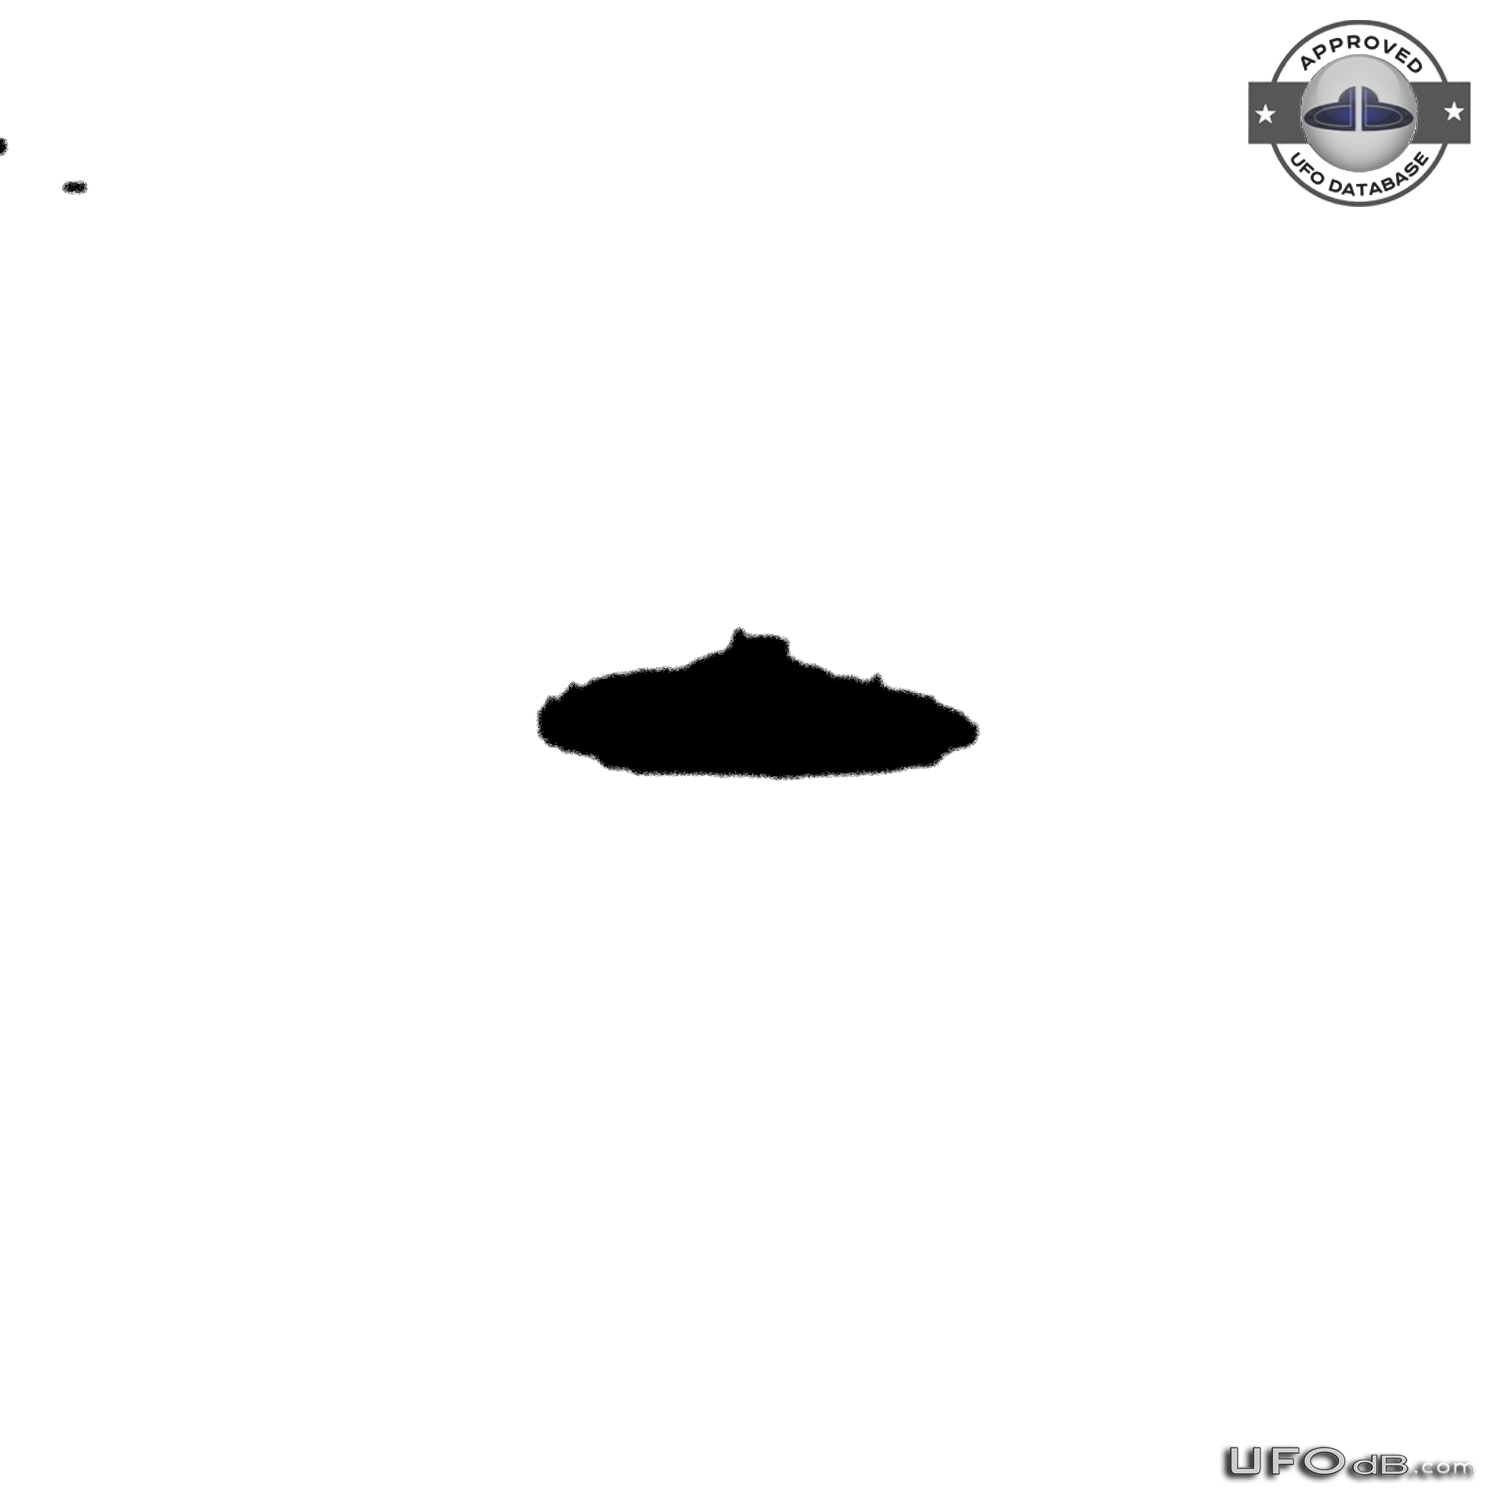 UFO saucer caught on picture - Lost River, West Virginia USA 2013 UFO Picture #616-6